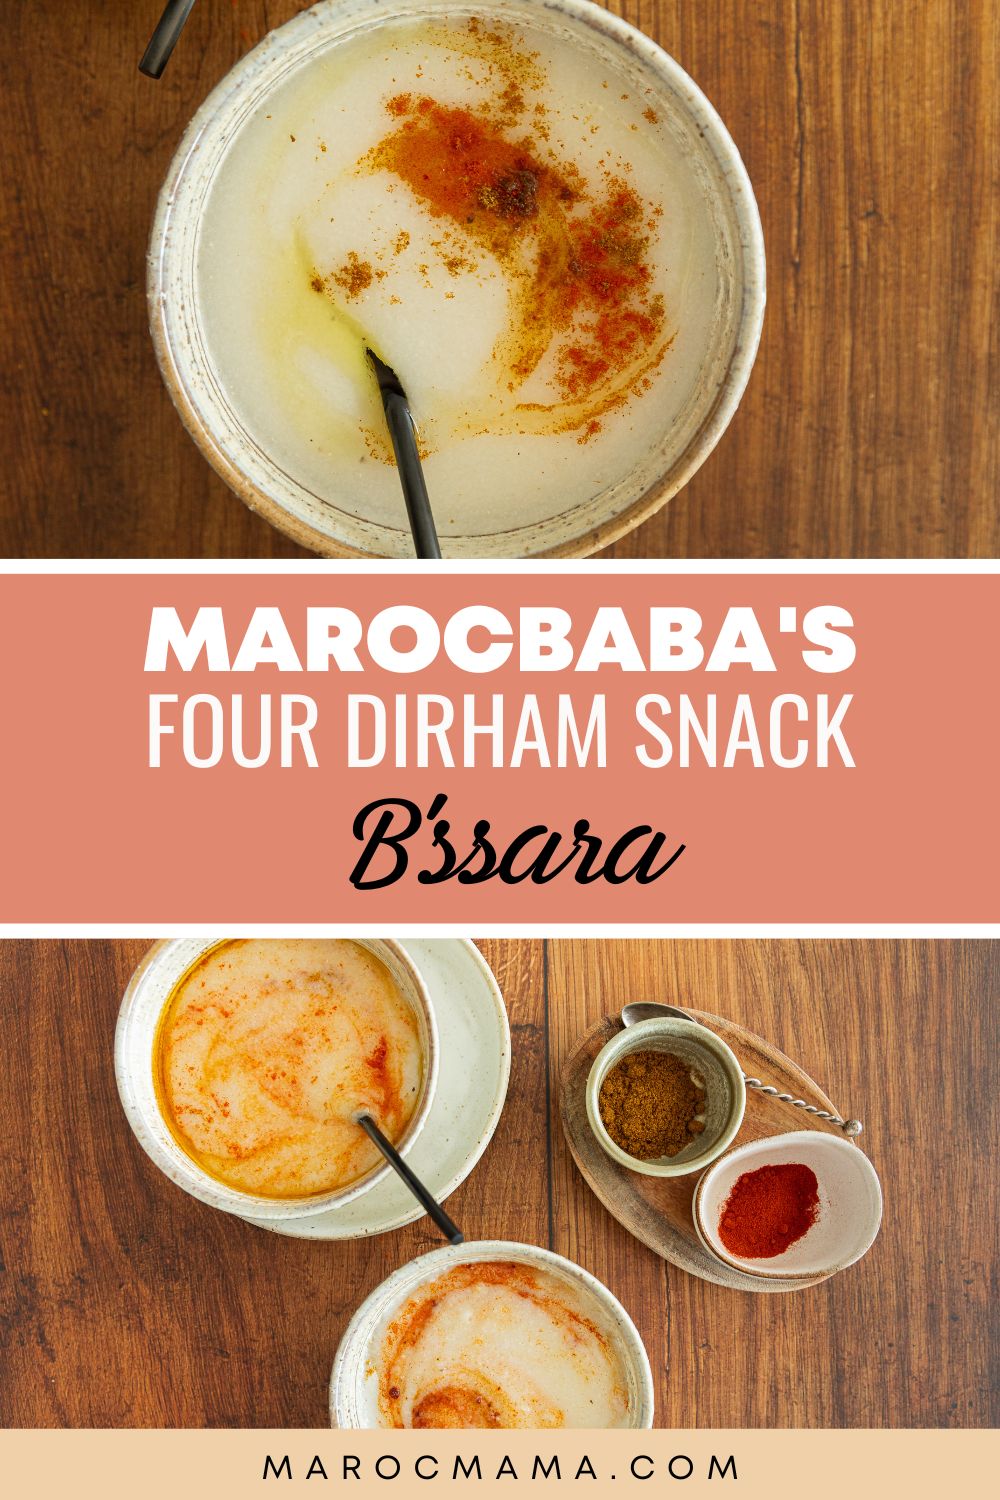 Bissara served on 2 bowls on a wooden table with the text B'ssara MarocBabas Four Dirham Snack